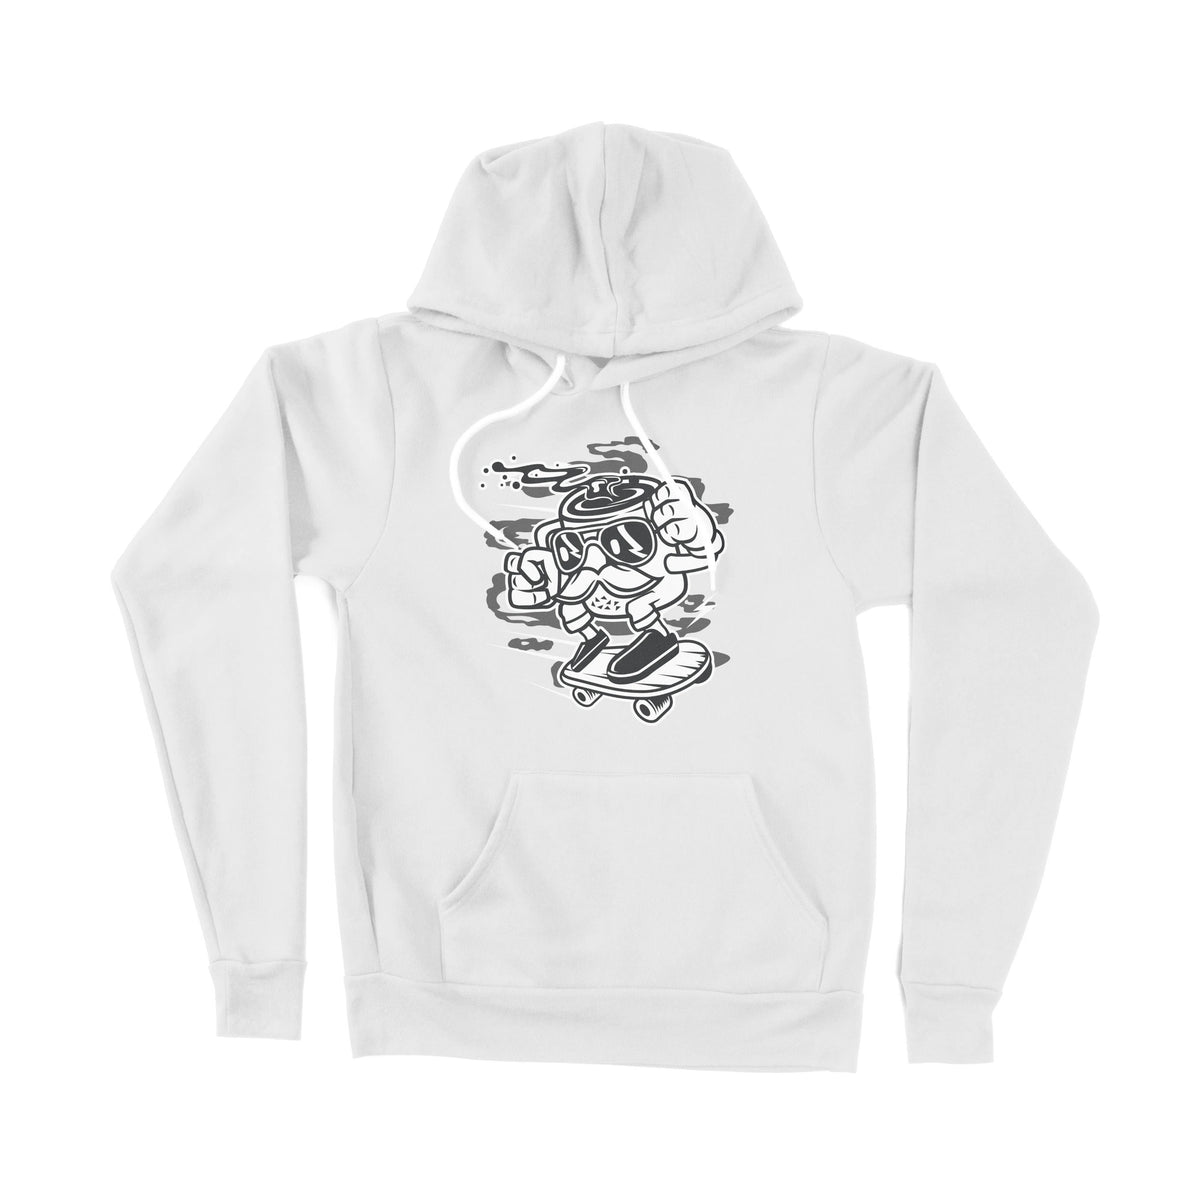 Cool Coffee Skater Dude Unisex Adult Hoodie Chroma Clothing